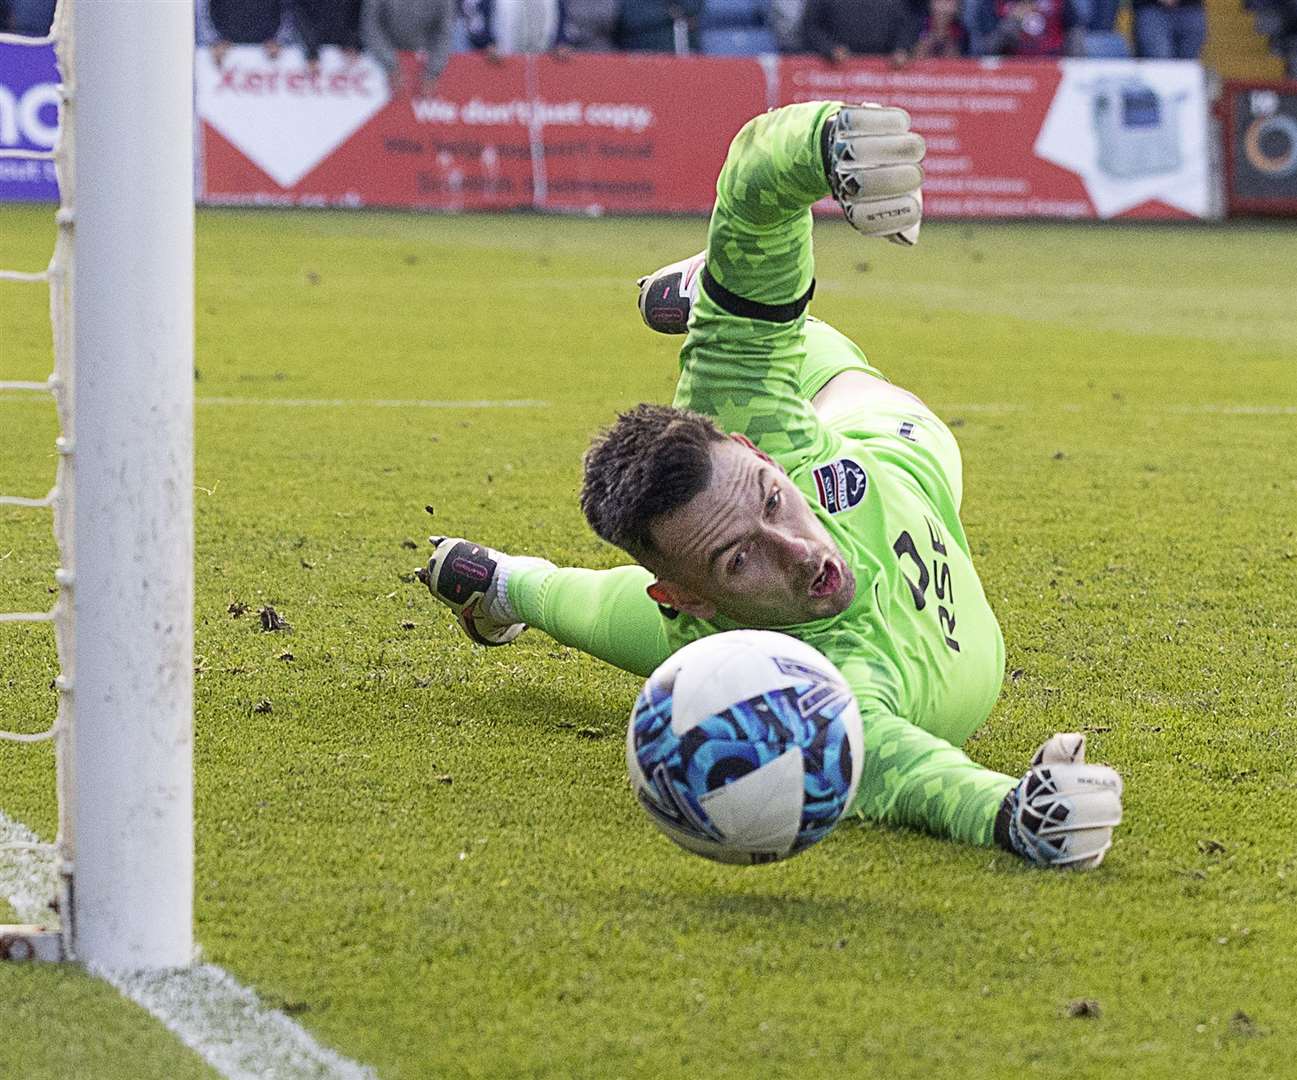 Ross County 'keeper Ross Laidlaw saves his 2nd penalty-kick from Partick's Ross Docherty. Picture: Ken Macpherson.